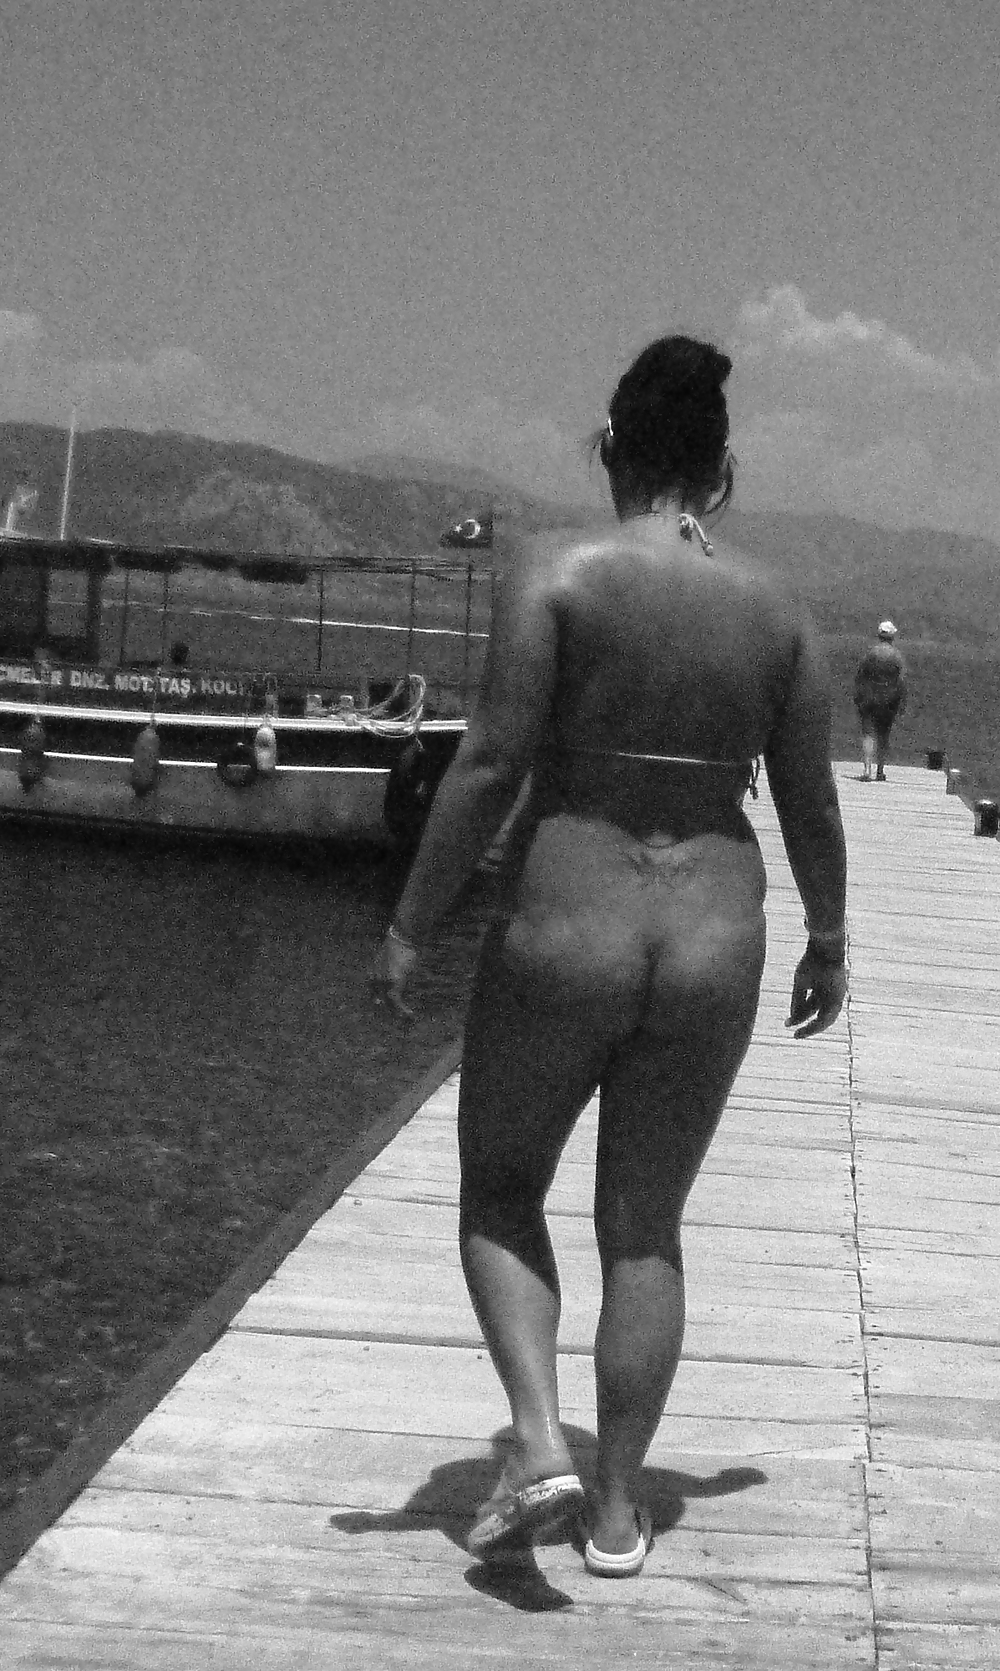 Me naked at the nudist beach #19796501